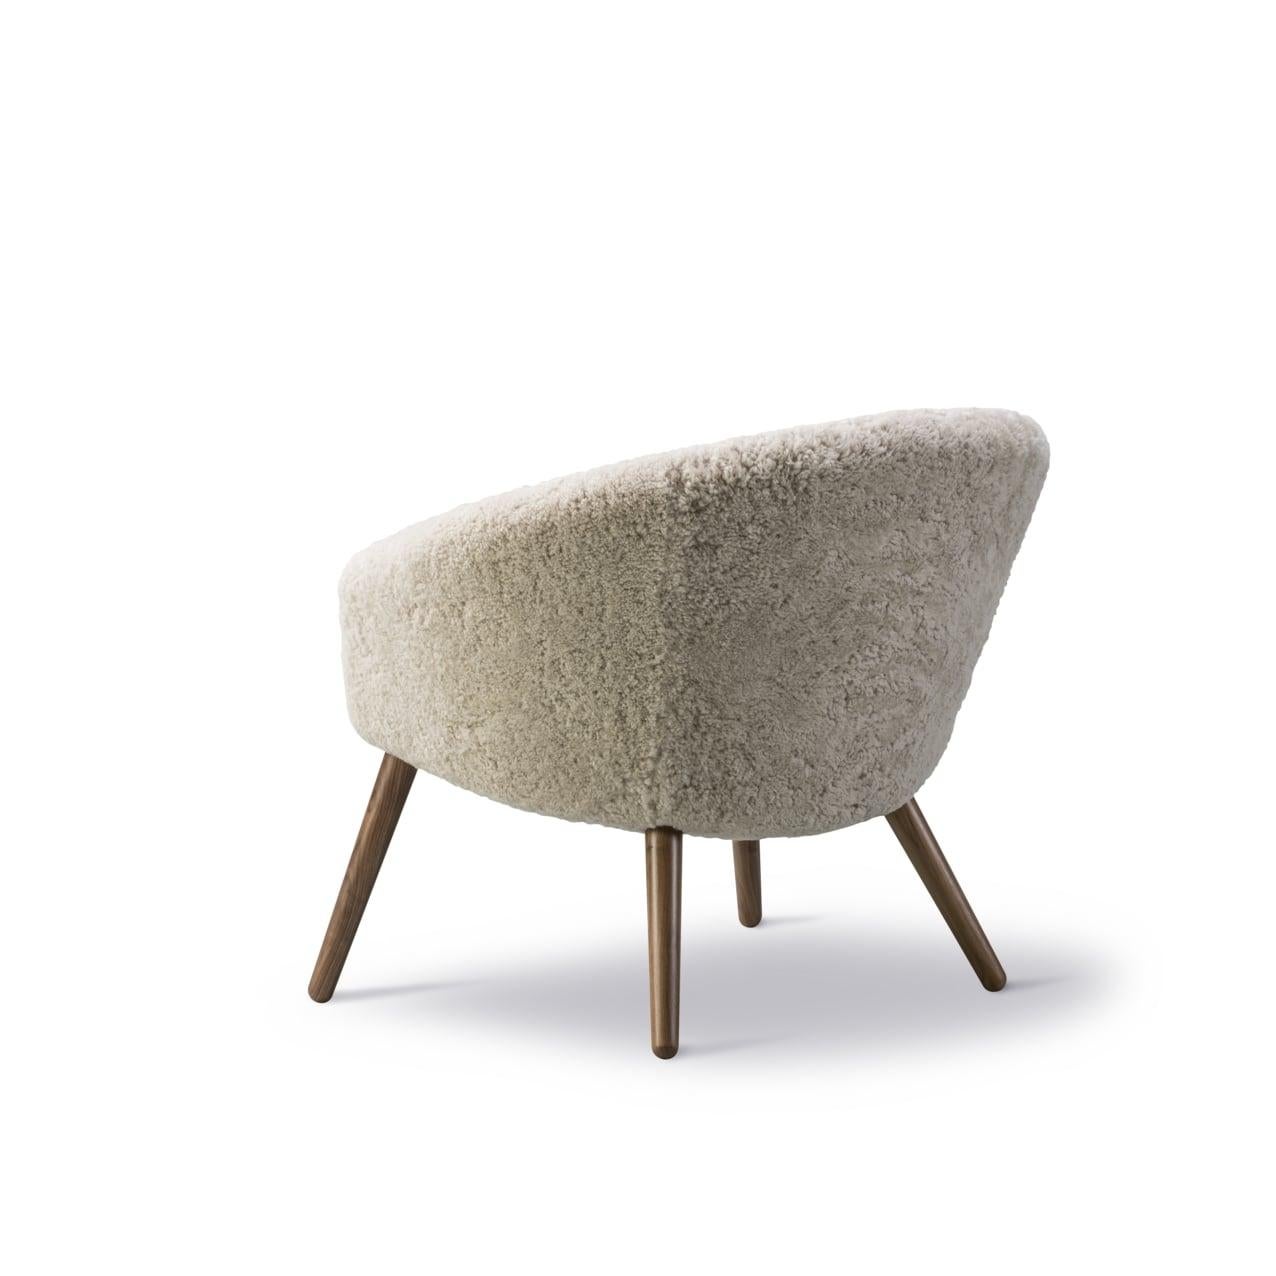 Ditzel Lounge Chair in Moonlight Sheepskin / Lacquered Walnut for Fredericia In New Condition For Sale In Dubai, AE